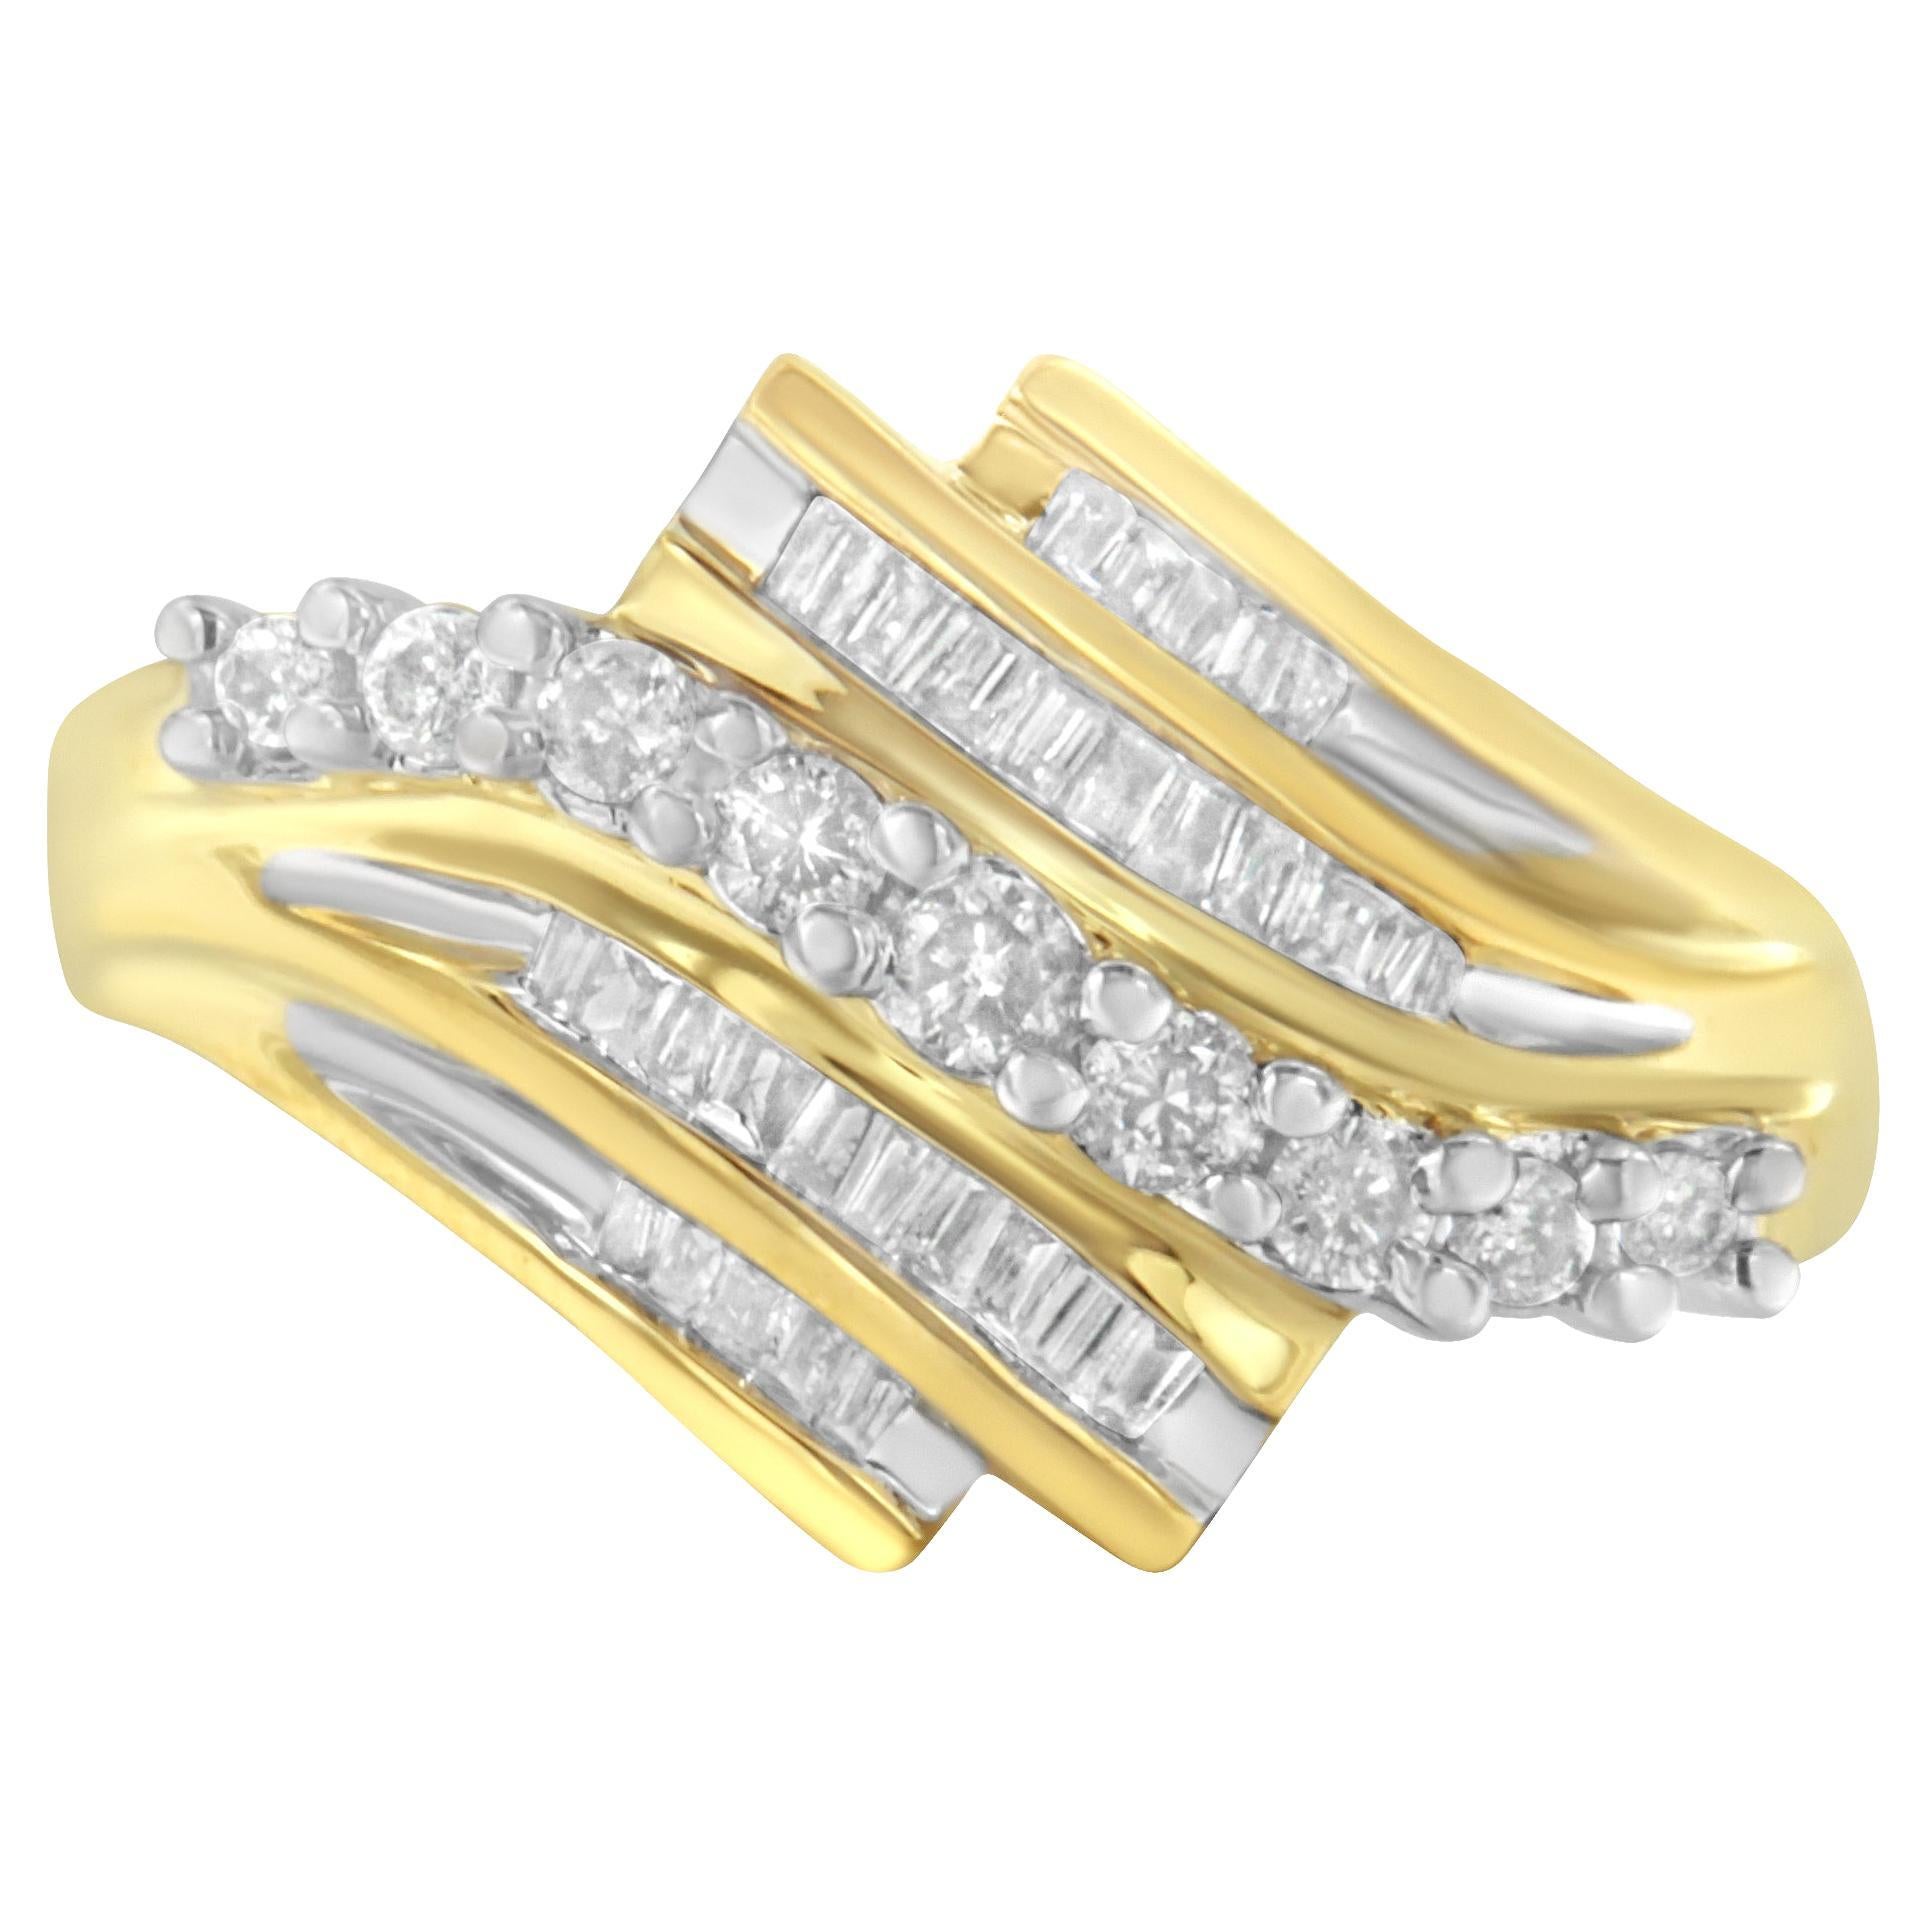 10k Yellow Gold 1/2 Carat Round and Baguette Diamond Cut Ring